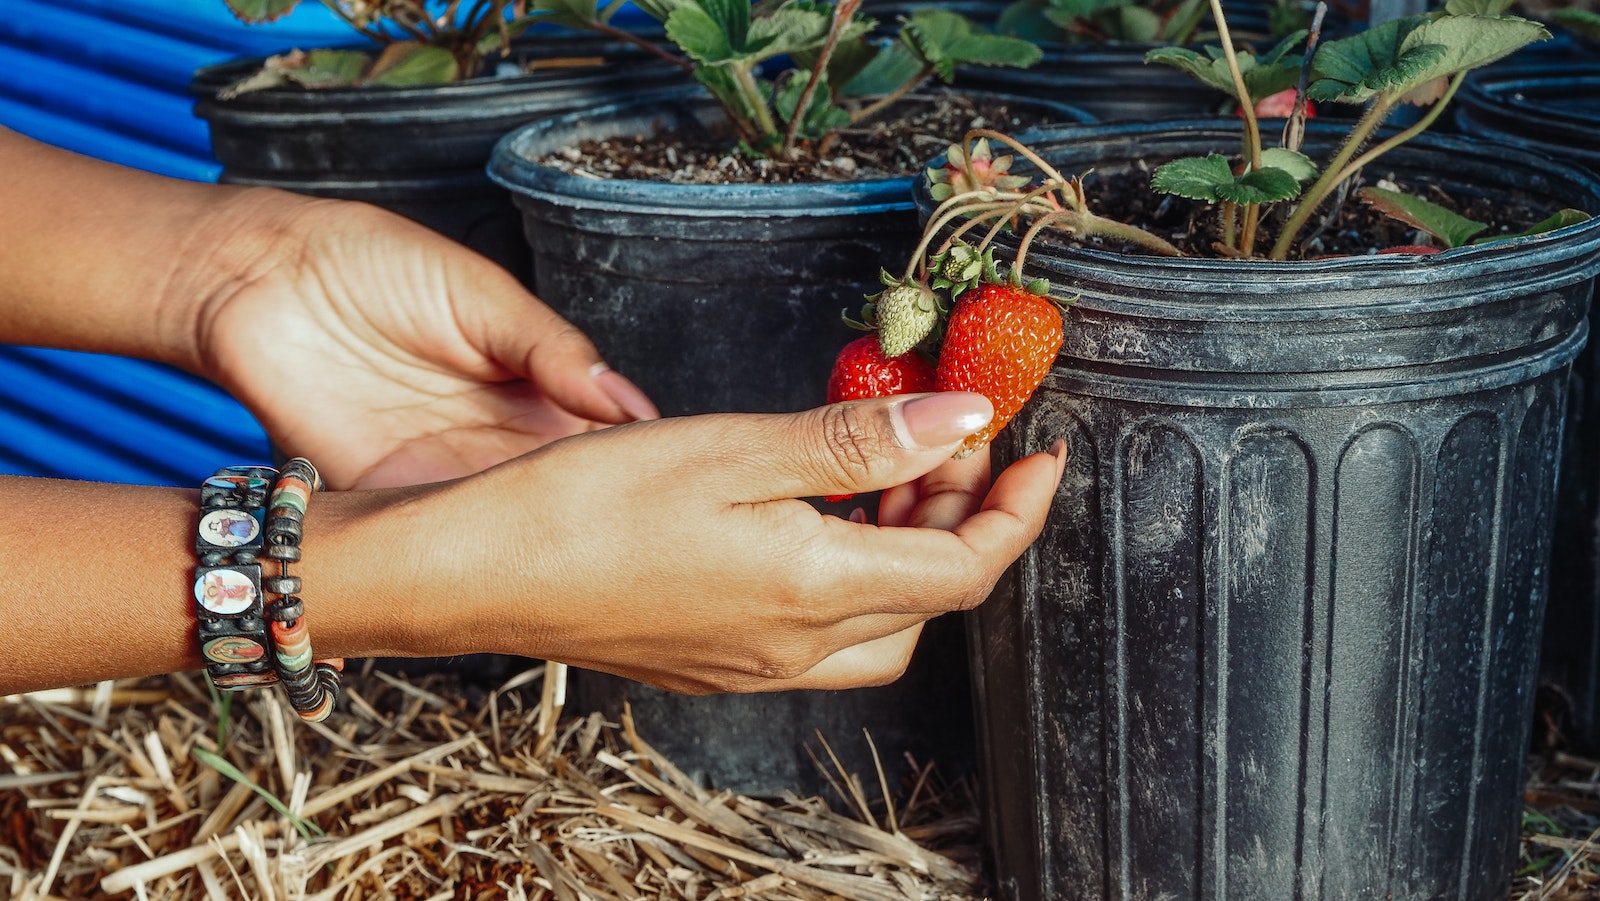 Person Holding Red Strawberries in Black Plastic Pot